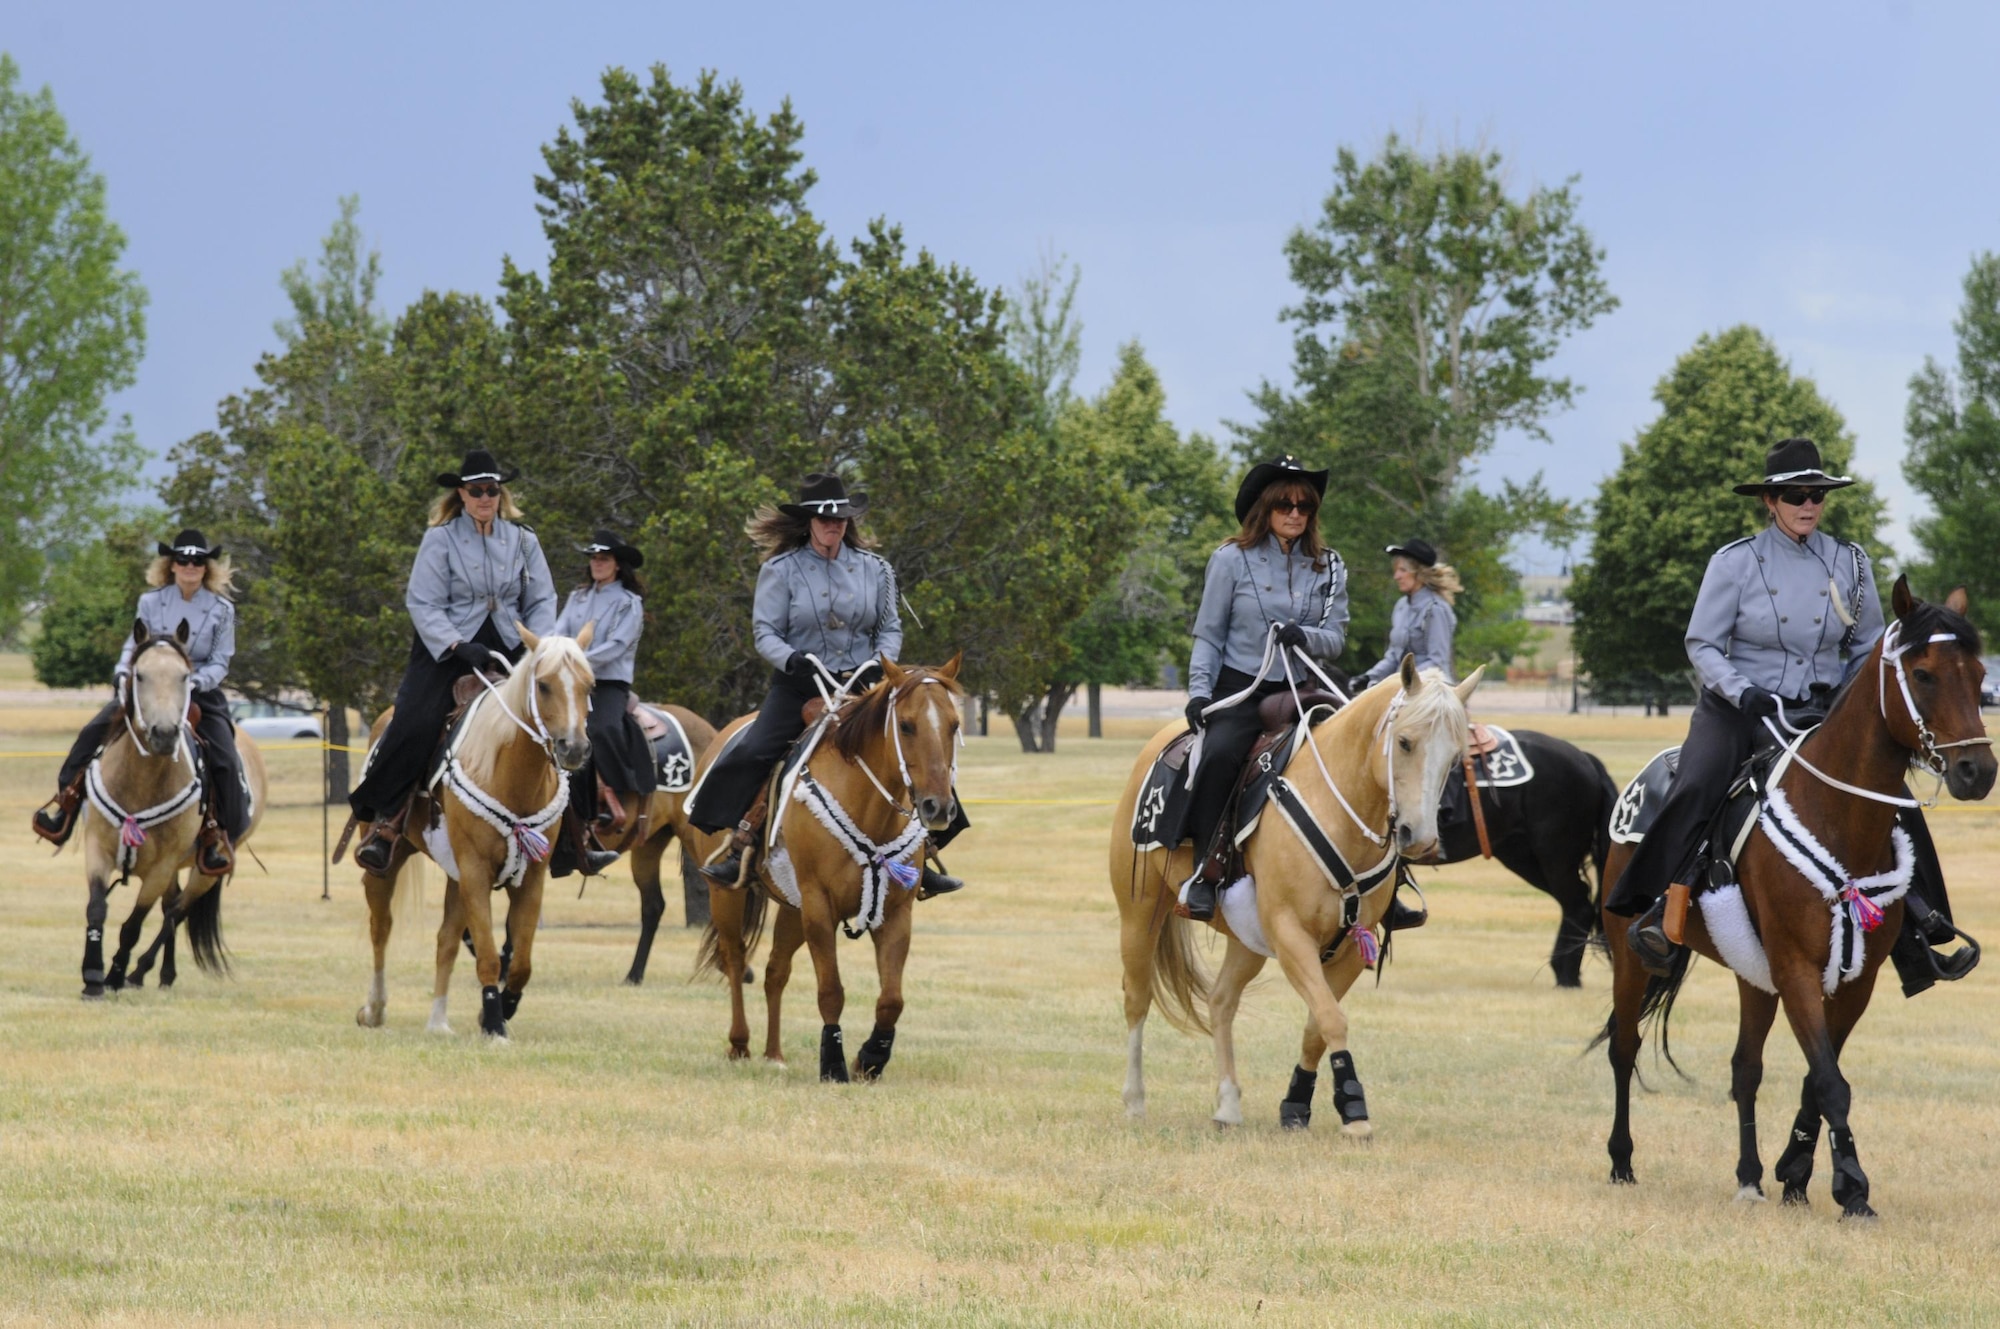 Members of the Trotters turn a corner in a column as they demonstrate their horse-riding skills July 22, 2016, during Fort D.A. Russell Days, the annual F.E. Warren Air Force Base, Wyo., open house. The Trotters perform at the open house each year. (U.S. Air Force photo by Senior Airman Jason Wiese)